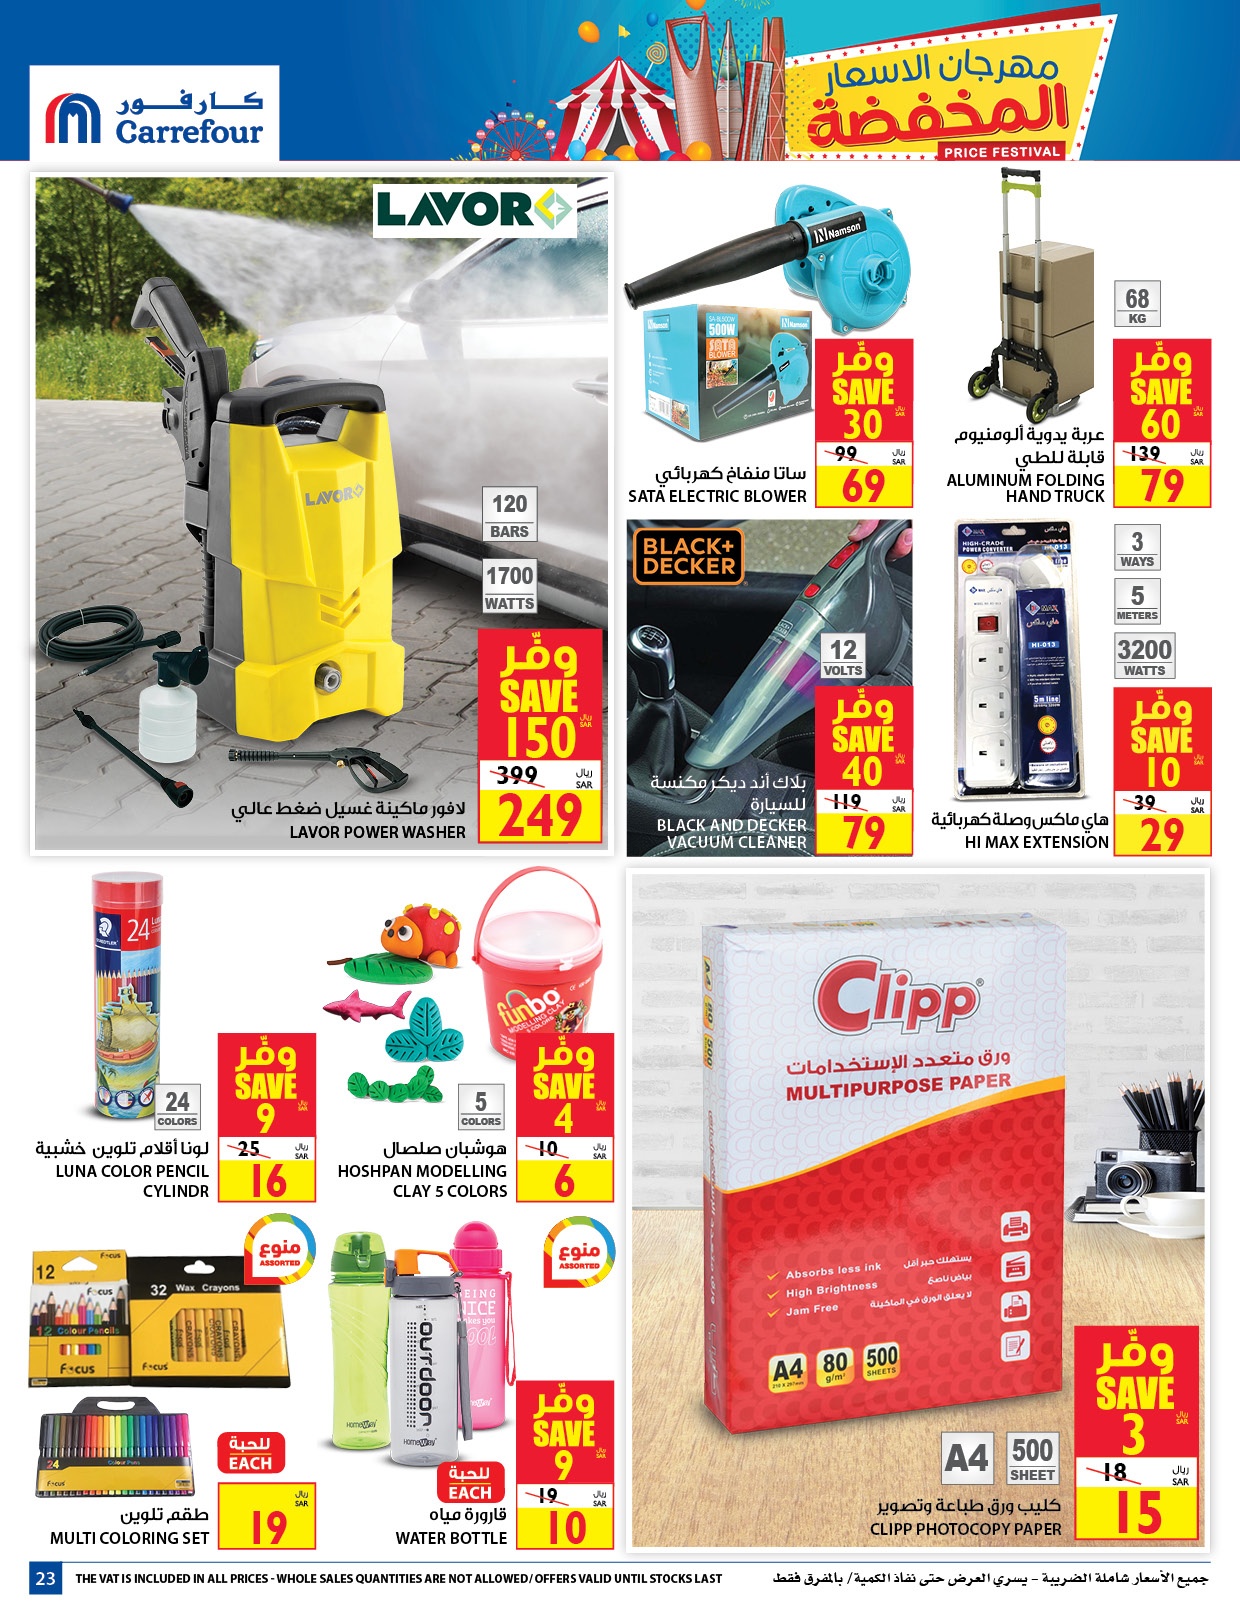 Carrefour Festival Offers from 12/8 till 25/8 | Carrefour KSA 26